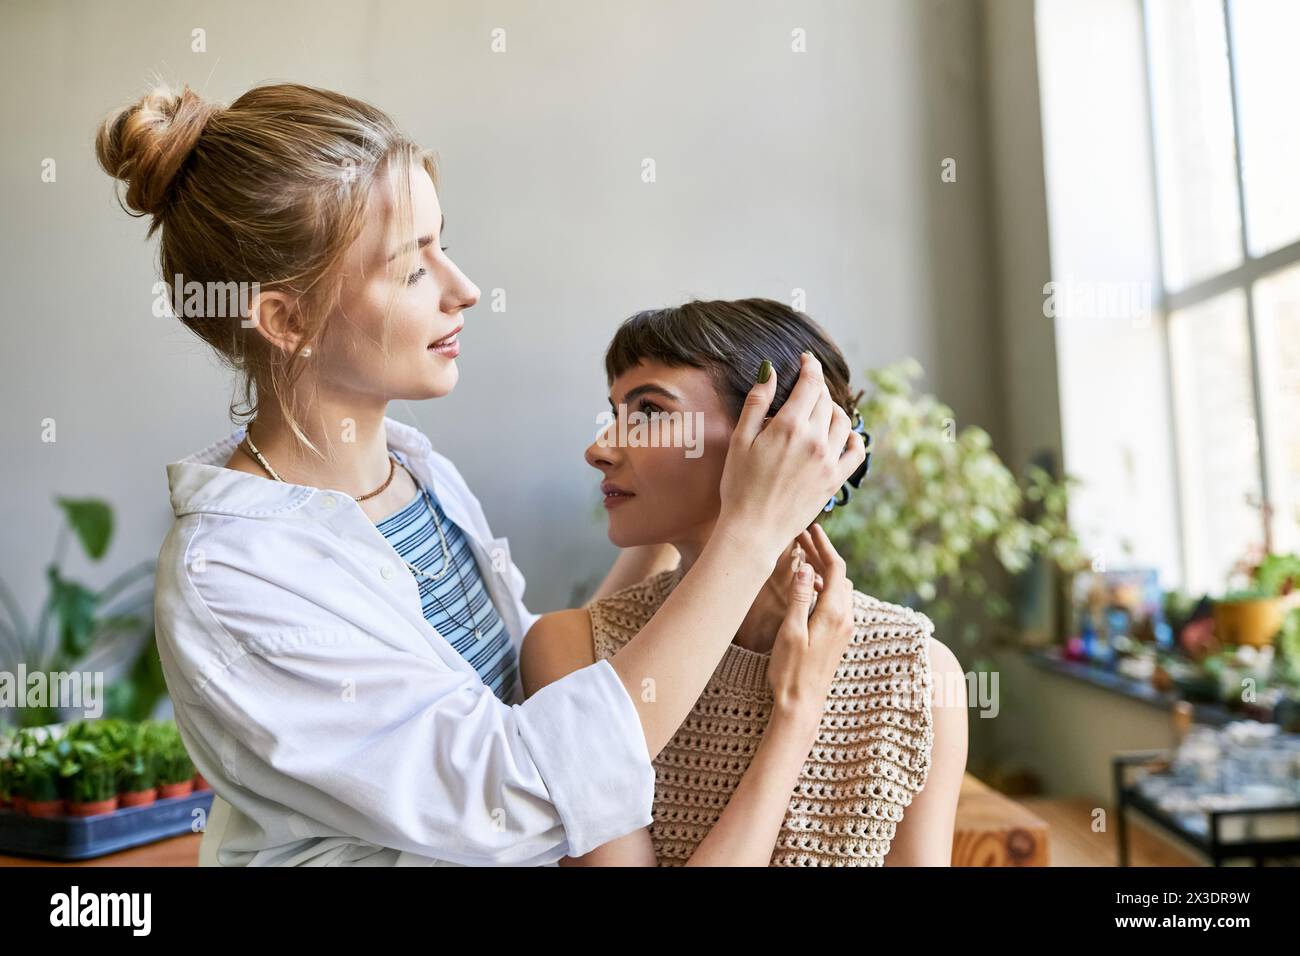 A woman lovingly styles another womans hair in an art studio. Stock Photo